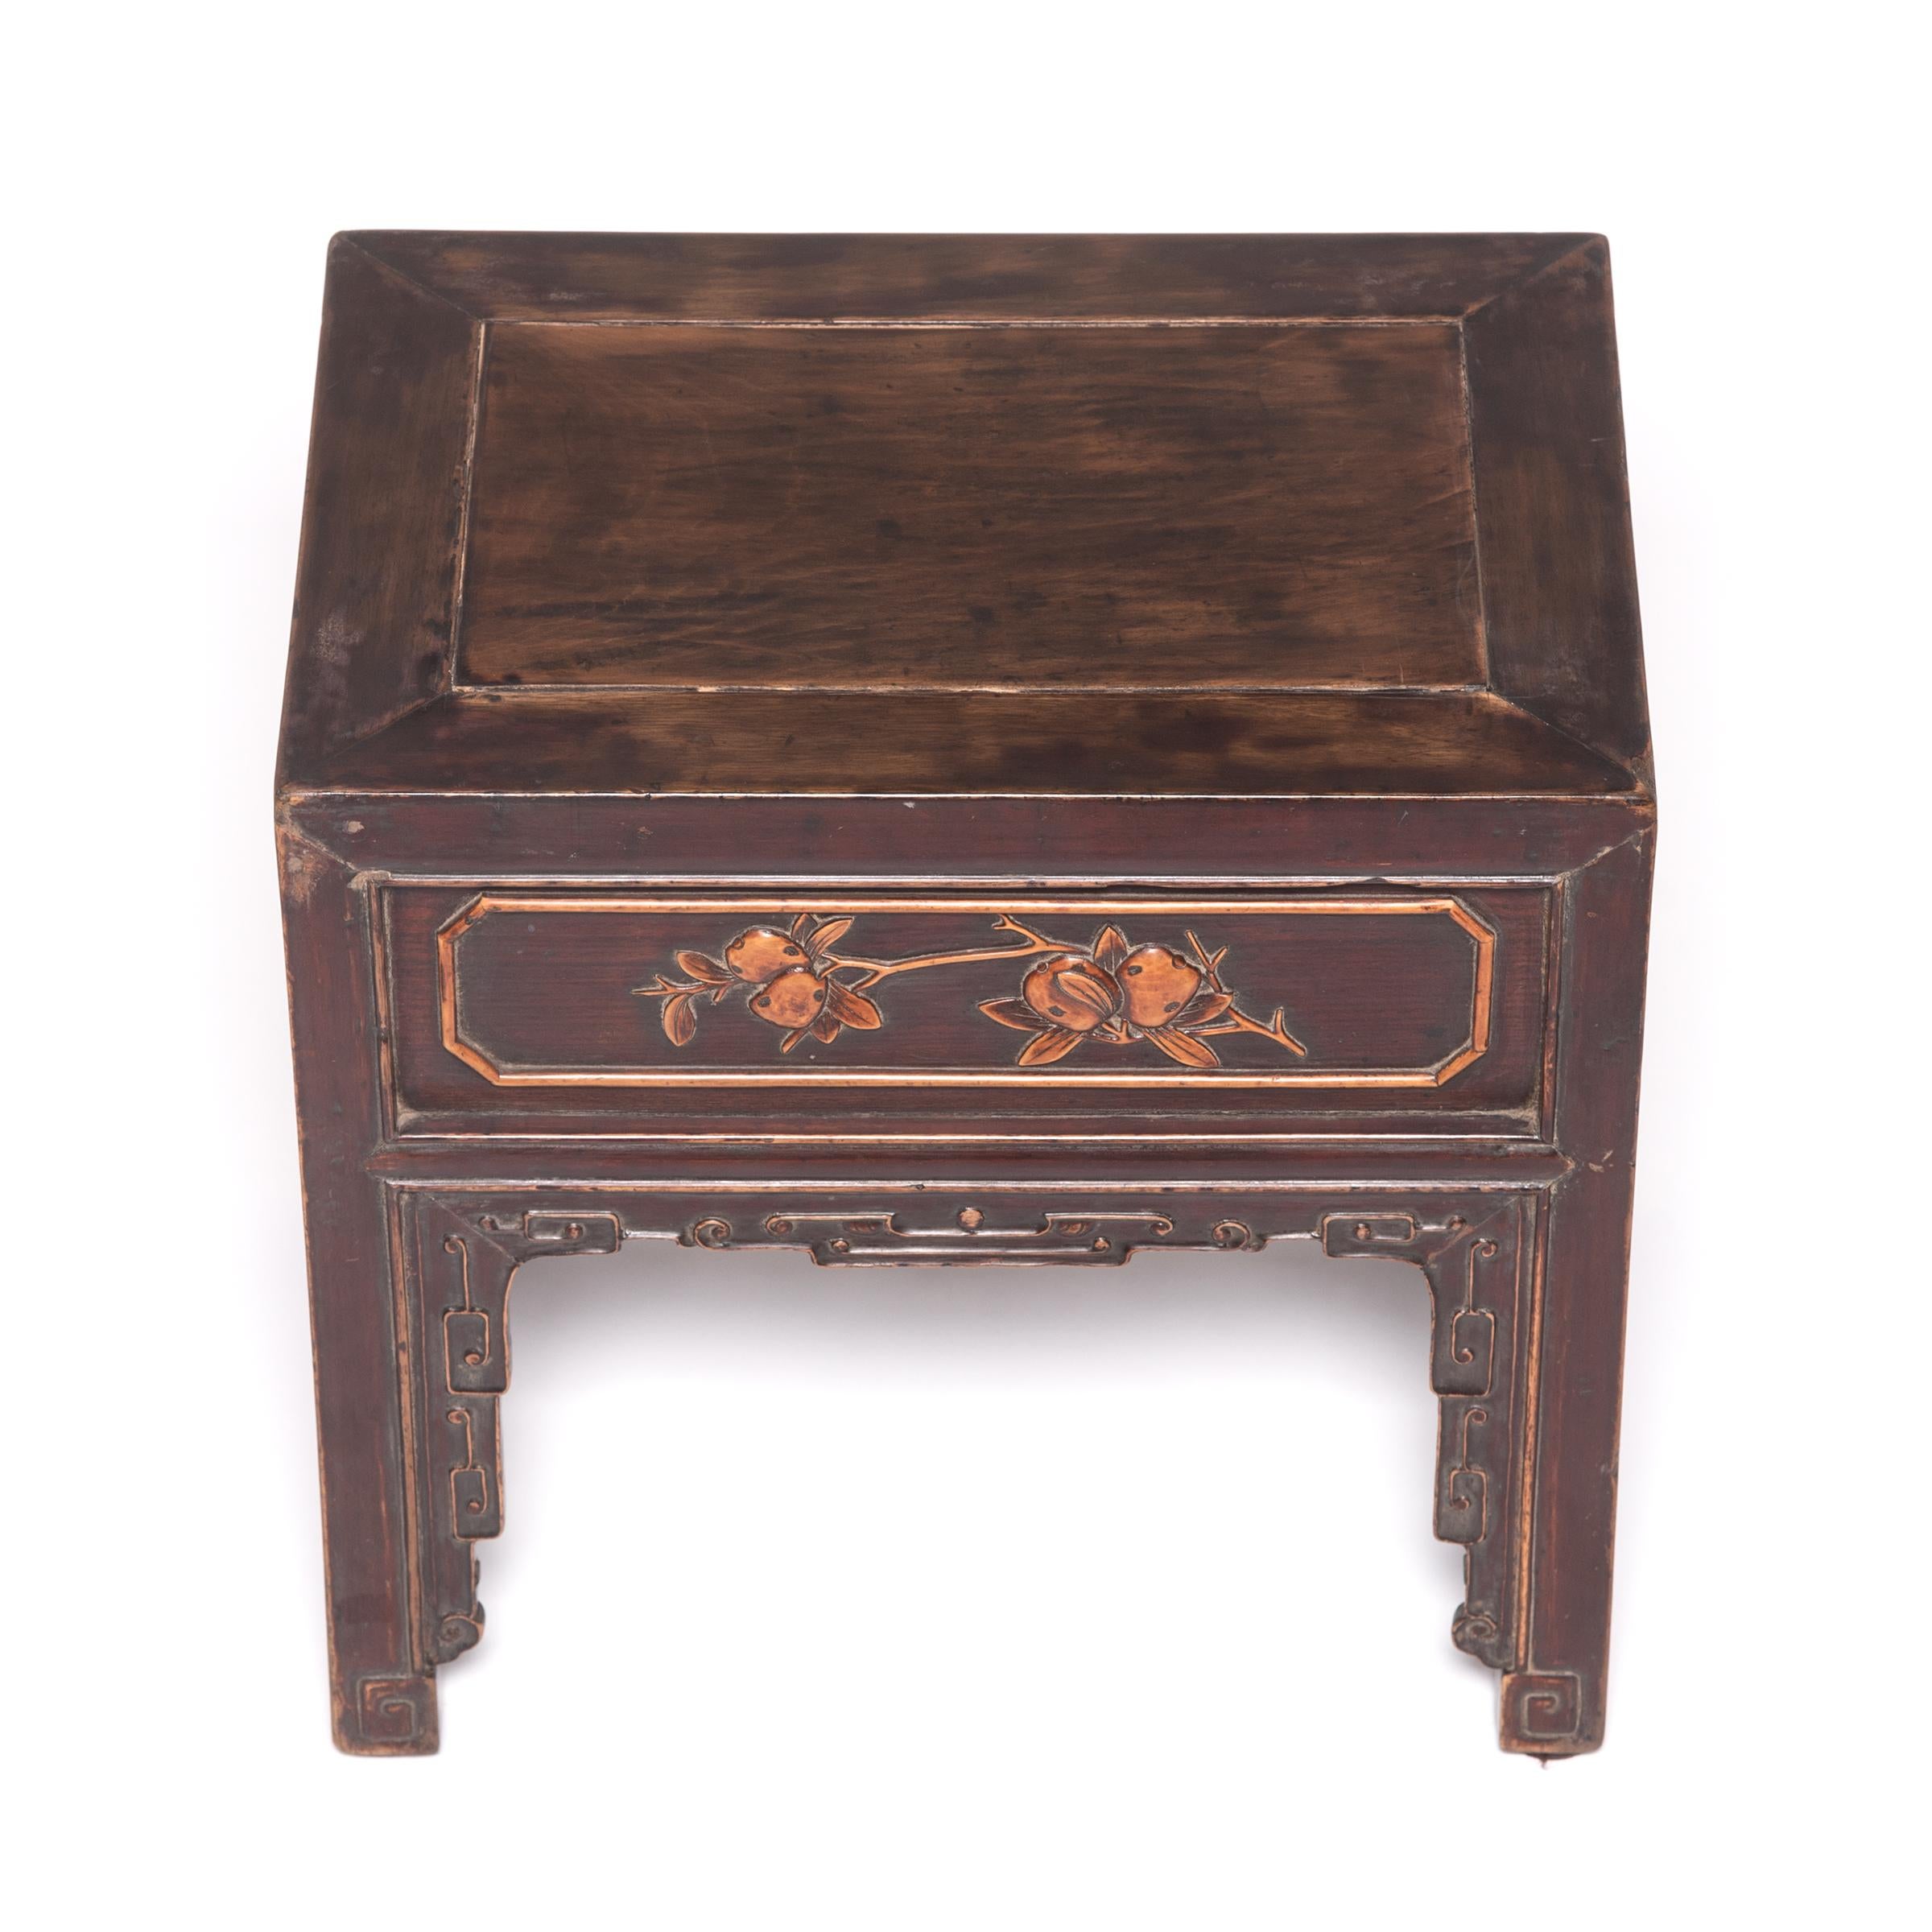 19th Century Pair of Petite Chinese Display Tables with Boxwood Inlay, c. 1850